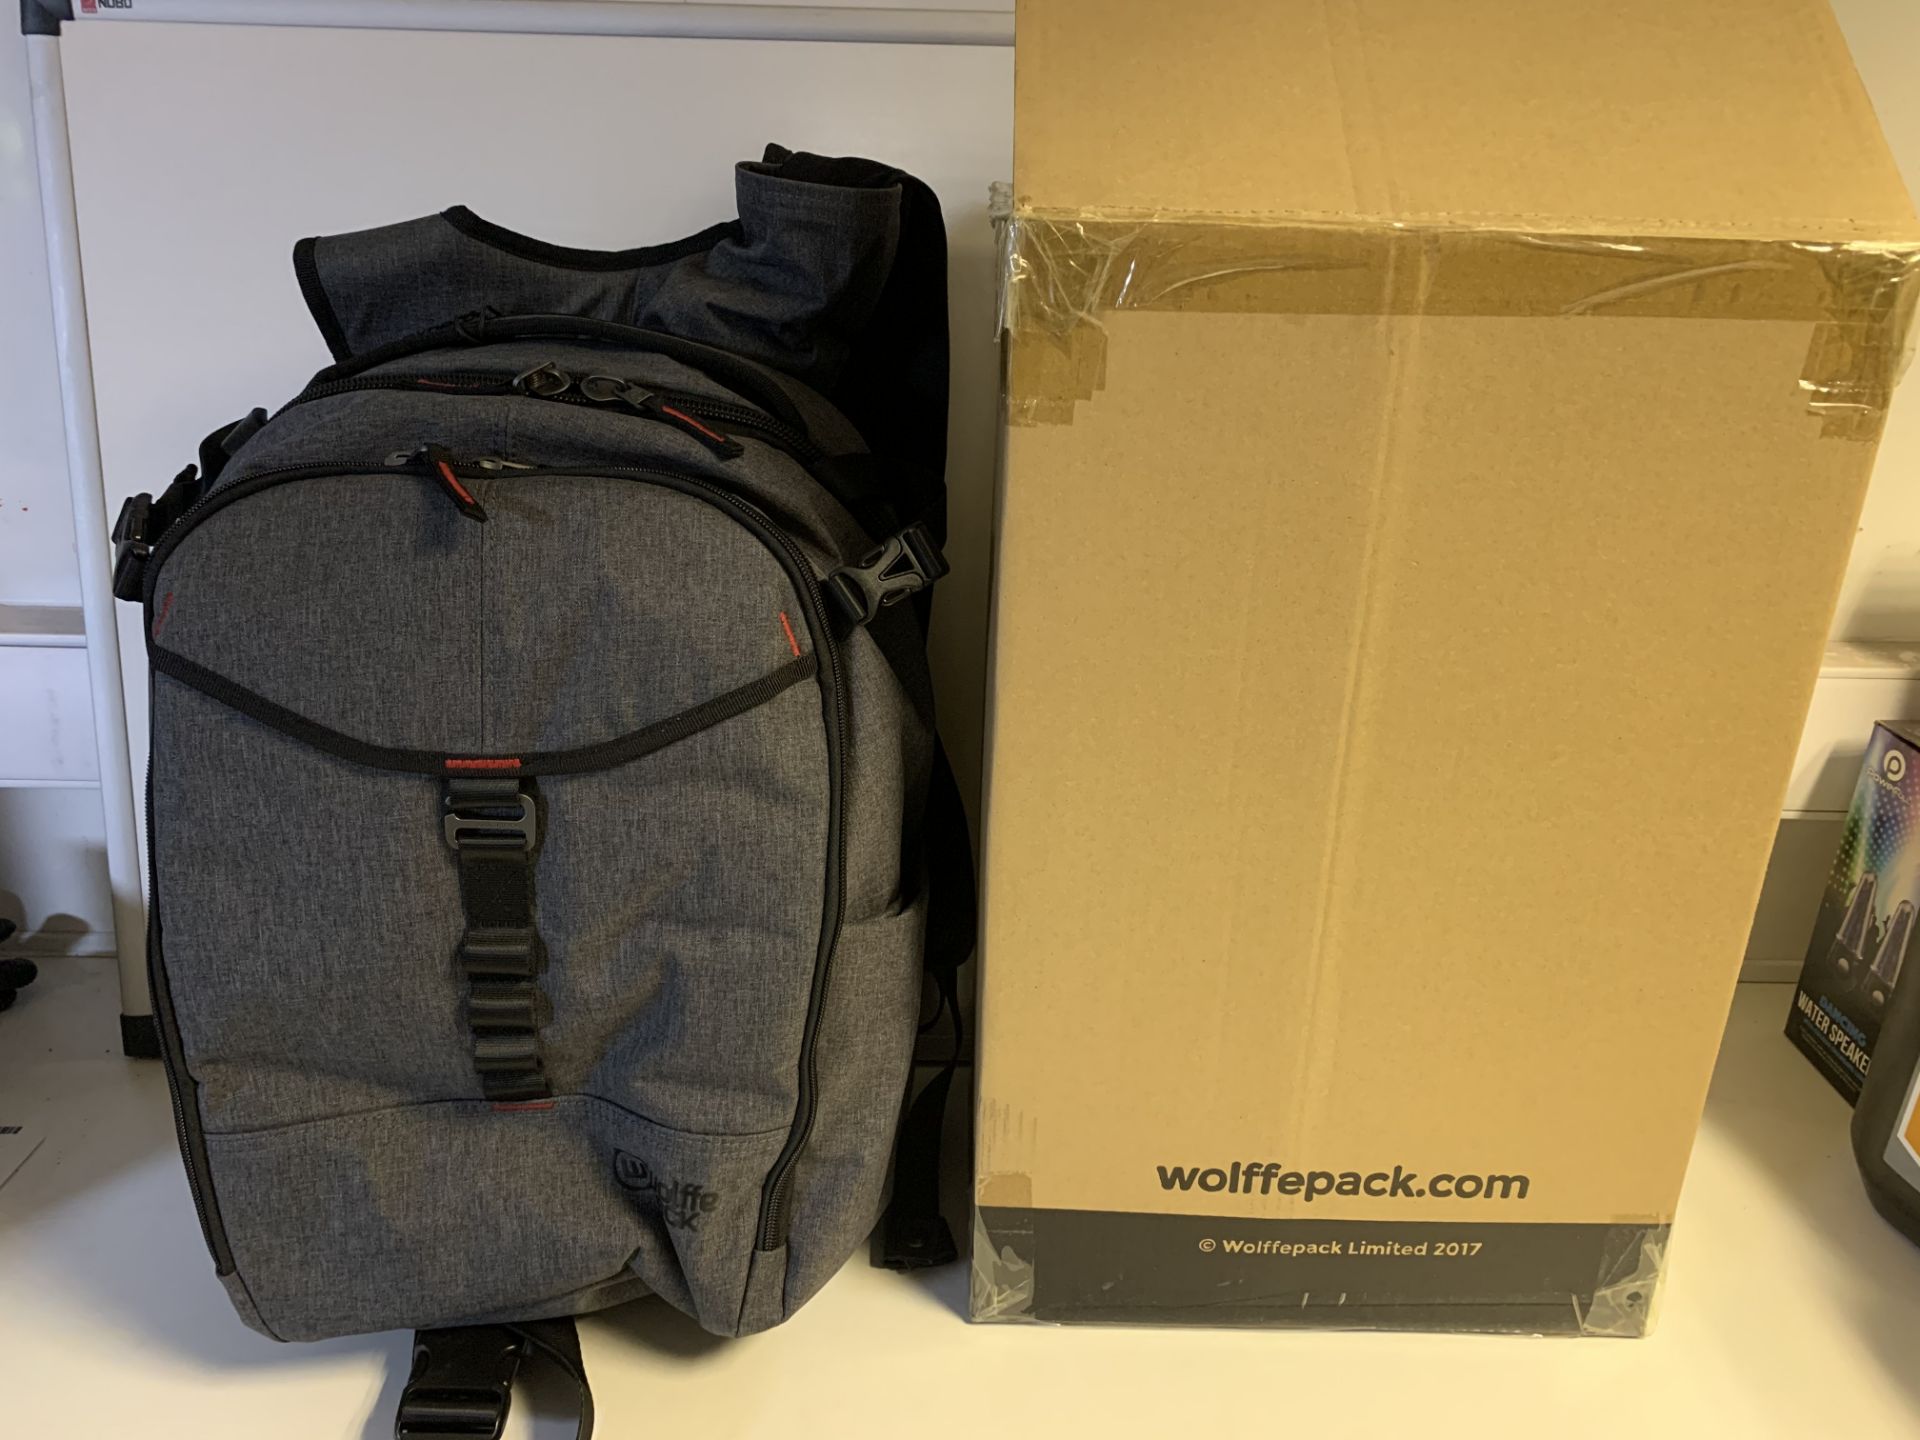 2 X BRAND NEW WOLFFEPACK CAPTURE BACKPACKS FOR PHOTOGRAPHY, 26L CAPACITY FOR PHOTOGRAPHY AND - Image 2 of 2